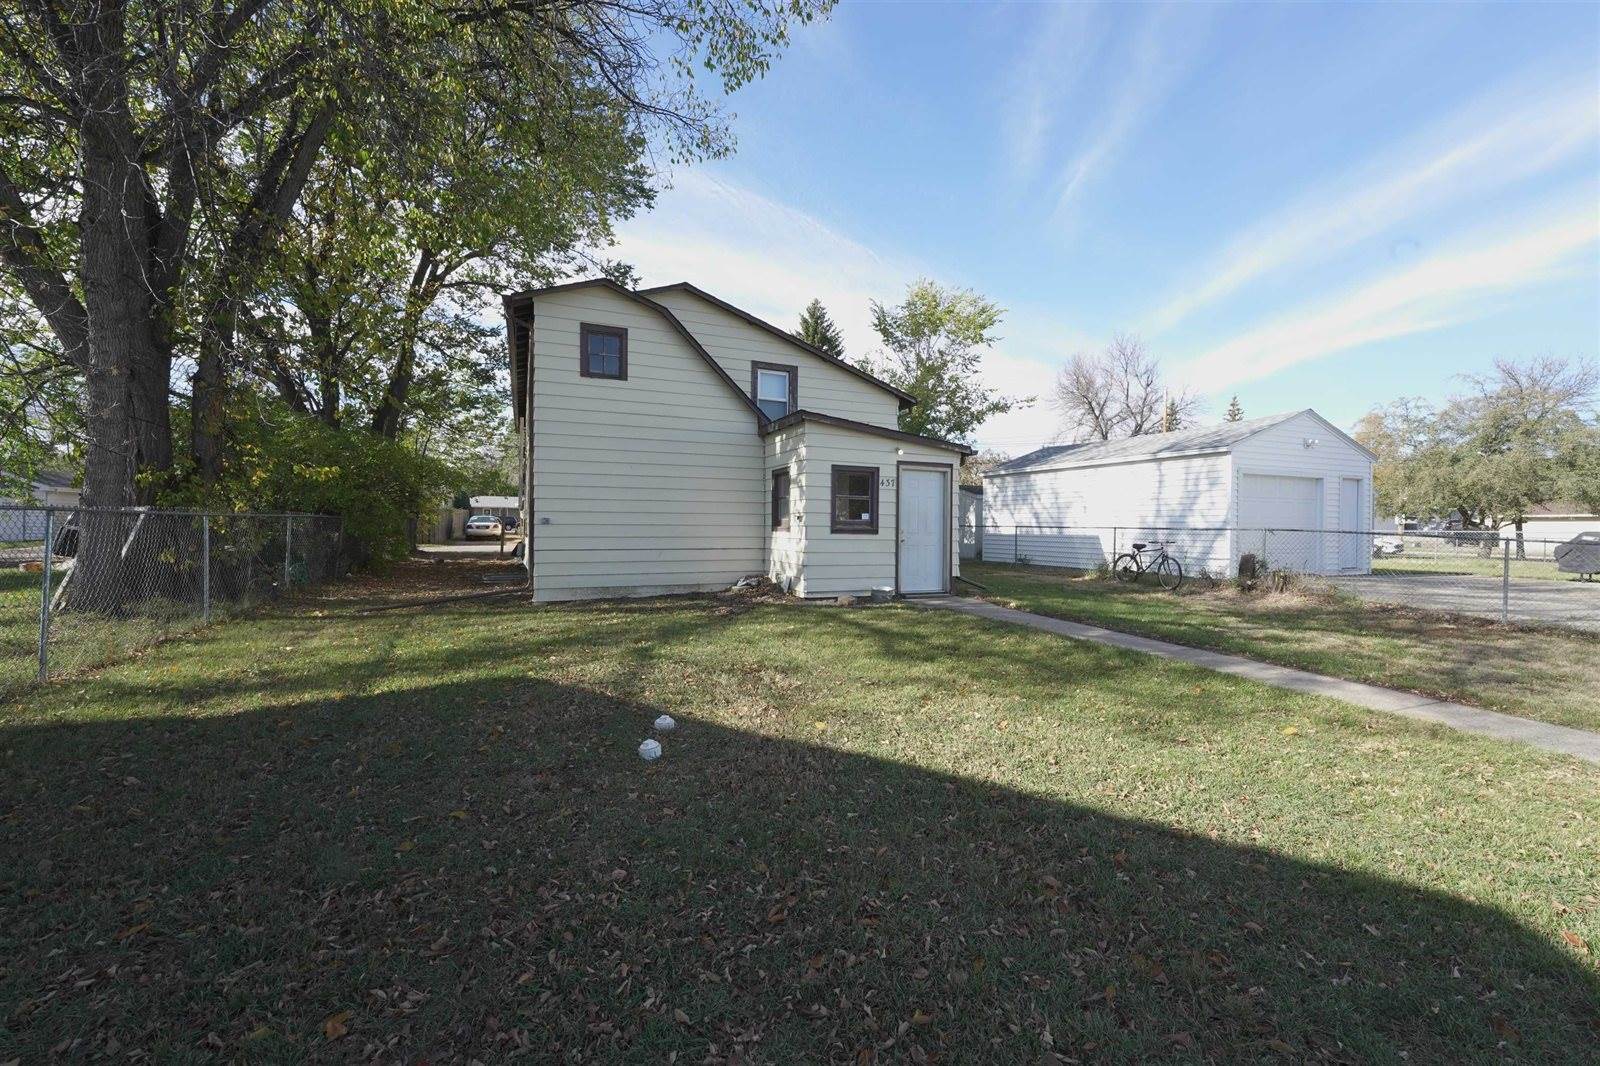 437 NW 19th St, Minot, ND 58701